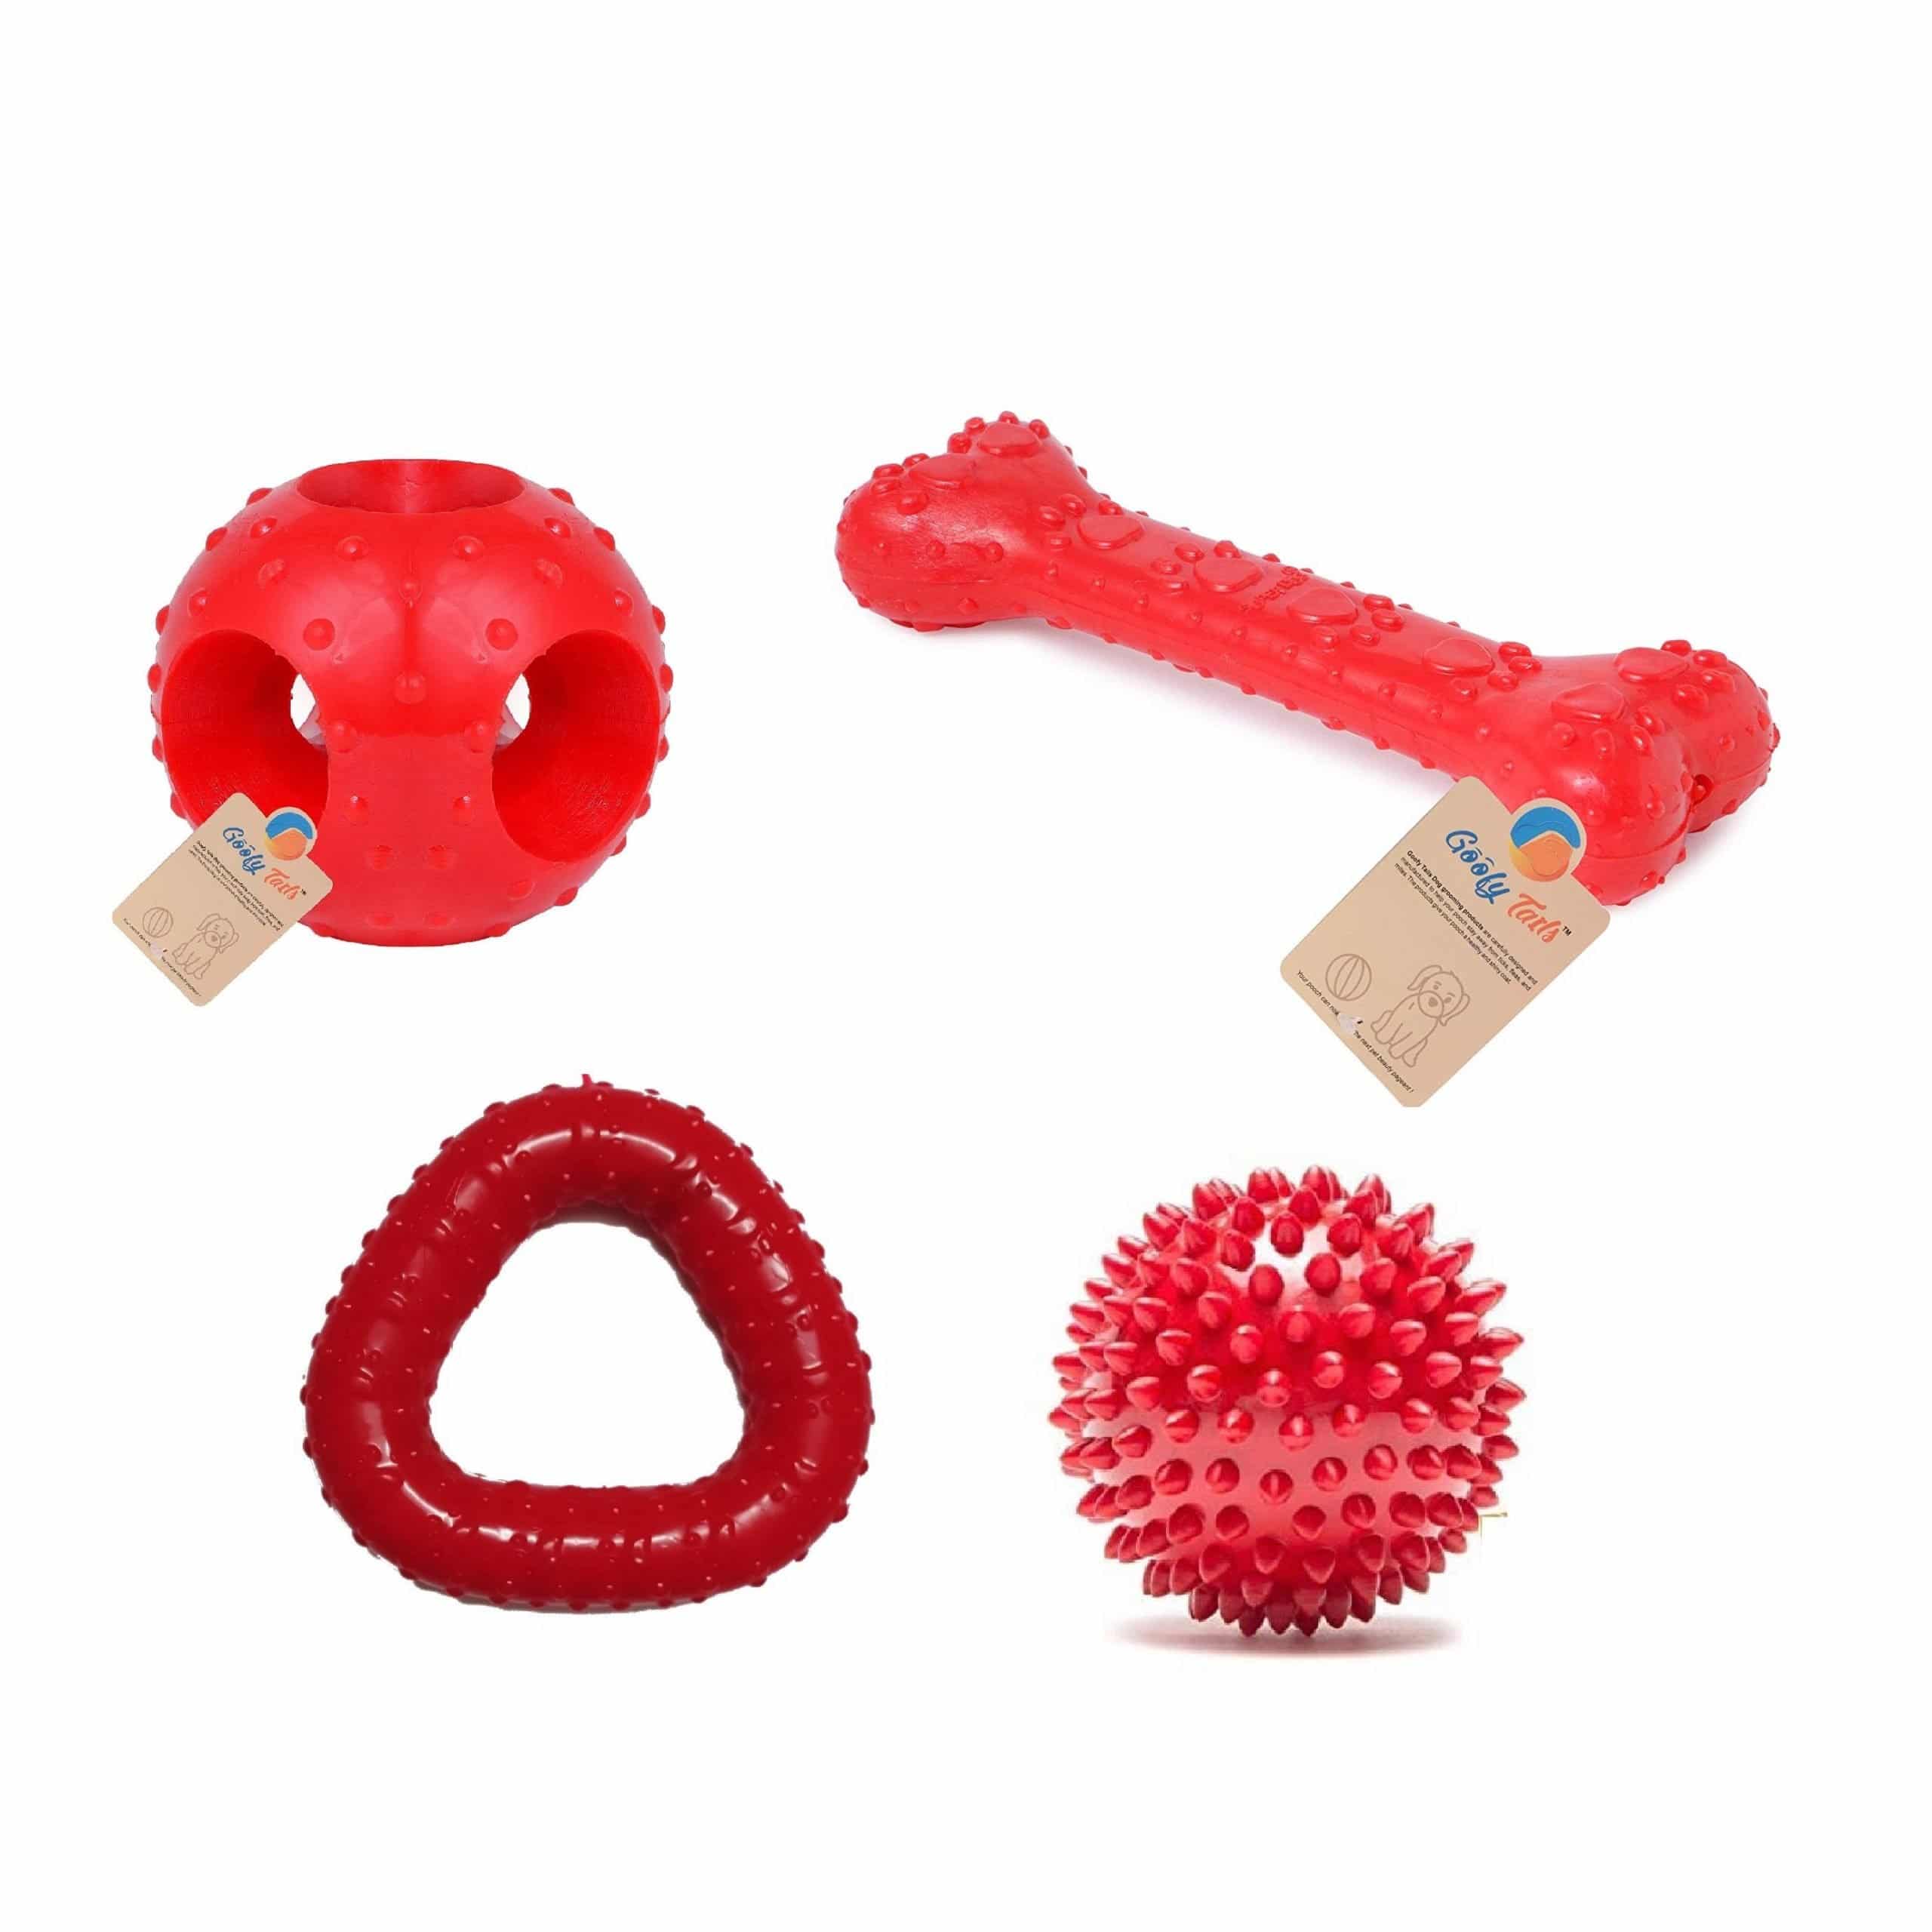 Goofy Tails Dog's Rubber Flavoured Bone, Hole and Spike Ball and Trio Chew Toy Combo - pet-club-india (7168394068118)